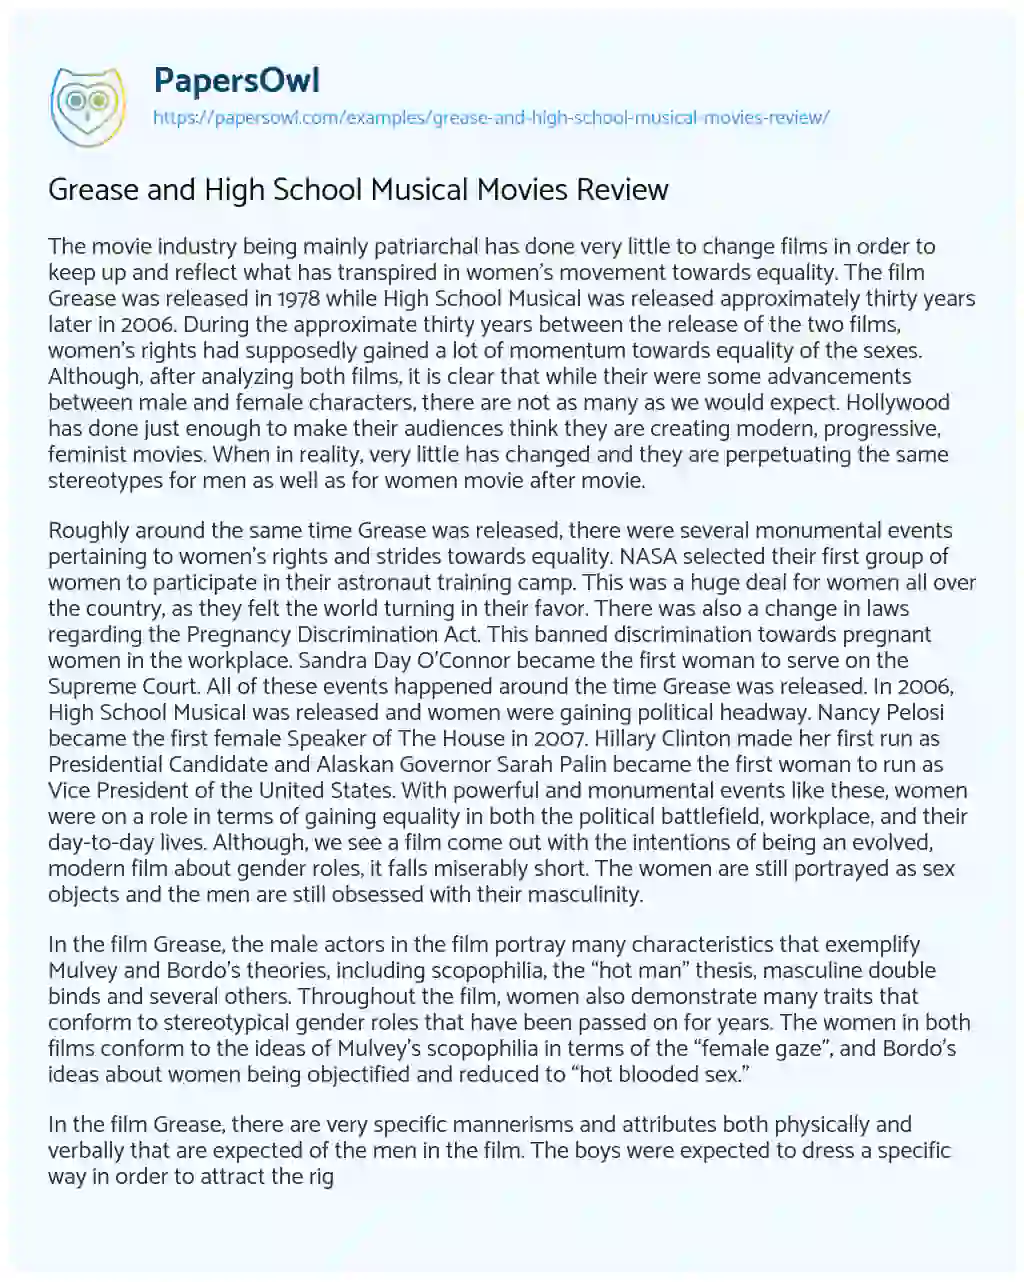 Essay on Grease and High School Musical Movies Review